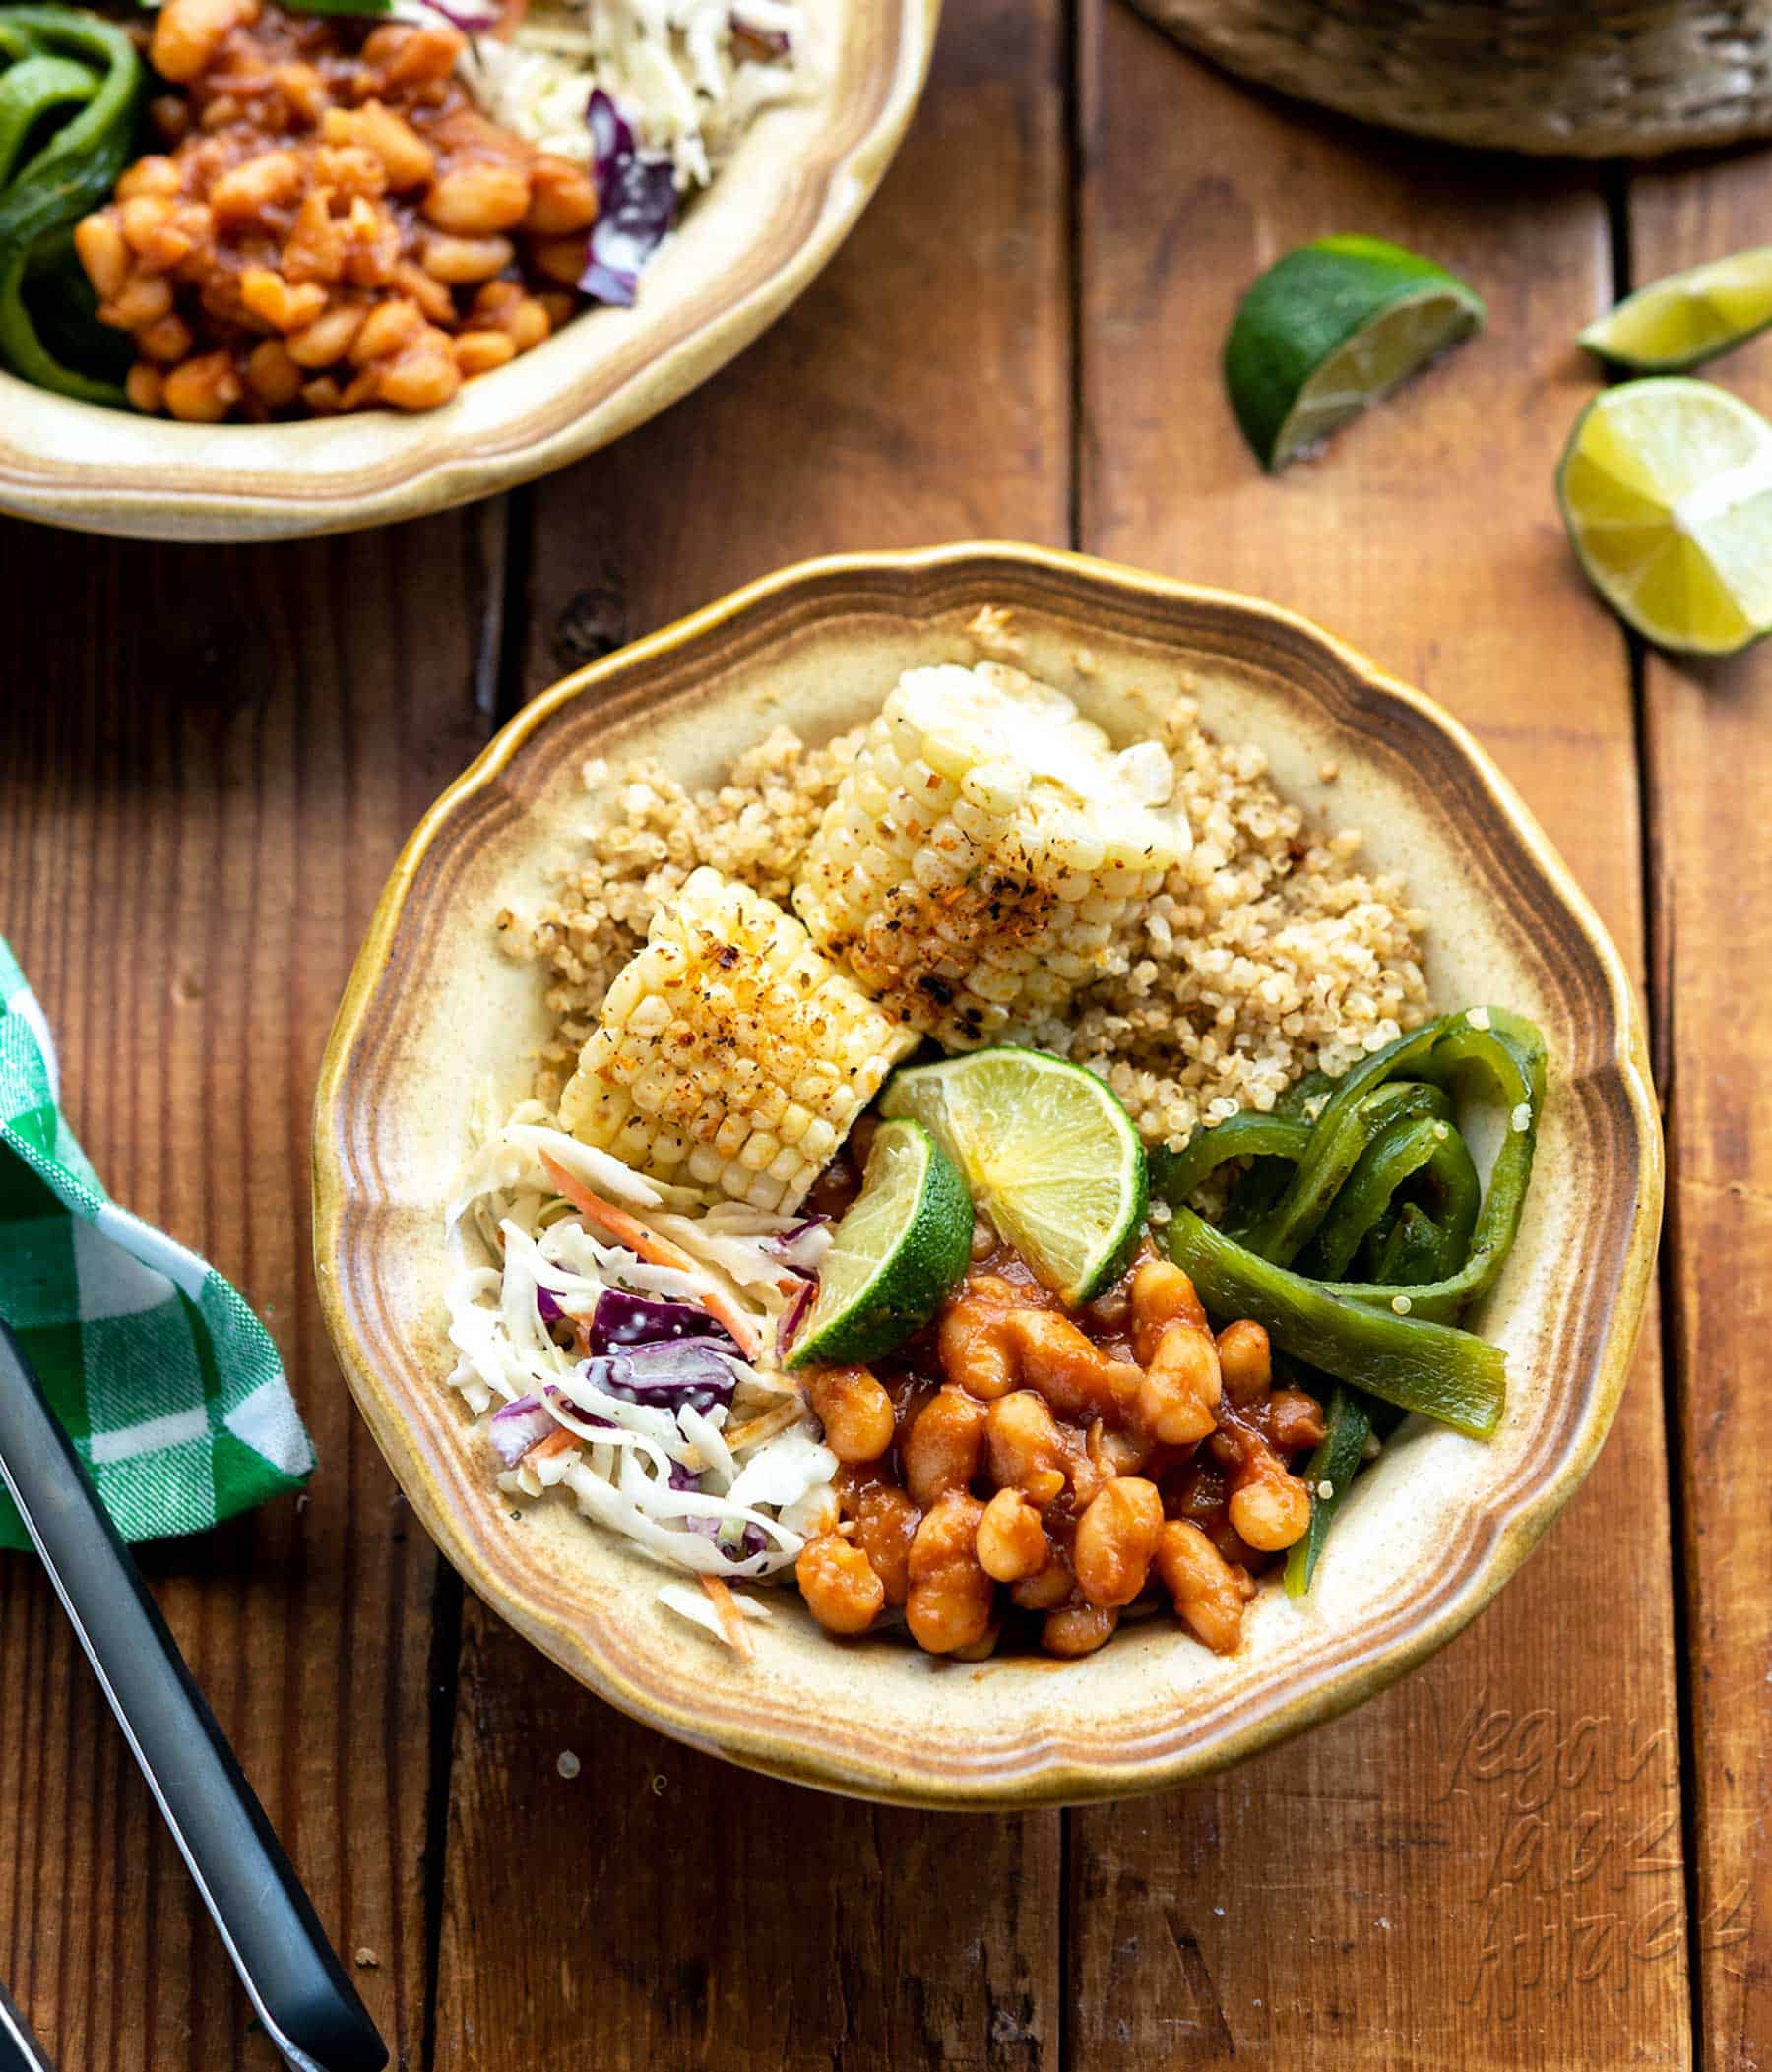 Just in time for summer, these #vegan BBQ Bean Bowls are a sampler of everything you love at a cookout! Grilled corn and pasilla peppers, coleslaw, quick bbq beans, plus, some cumin-spiced quinoa to make it a well-rounded meal. #glutenfree #plantbased